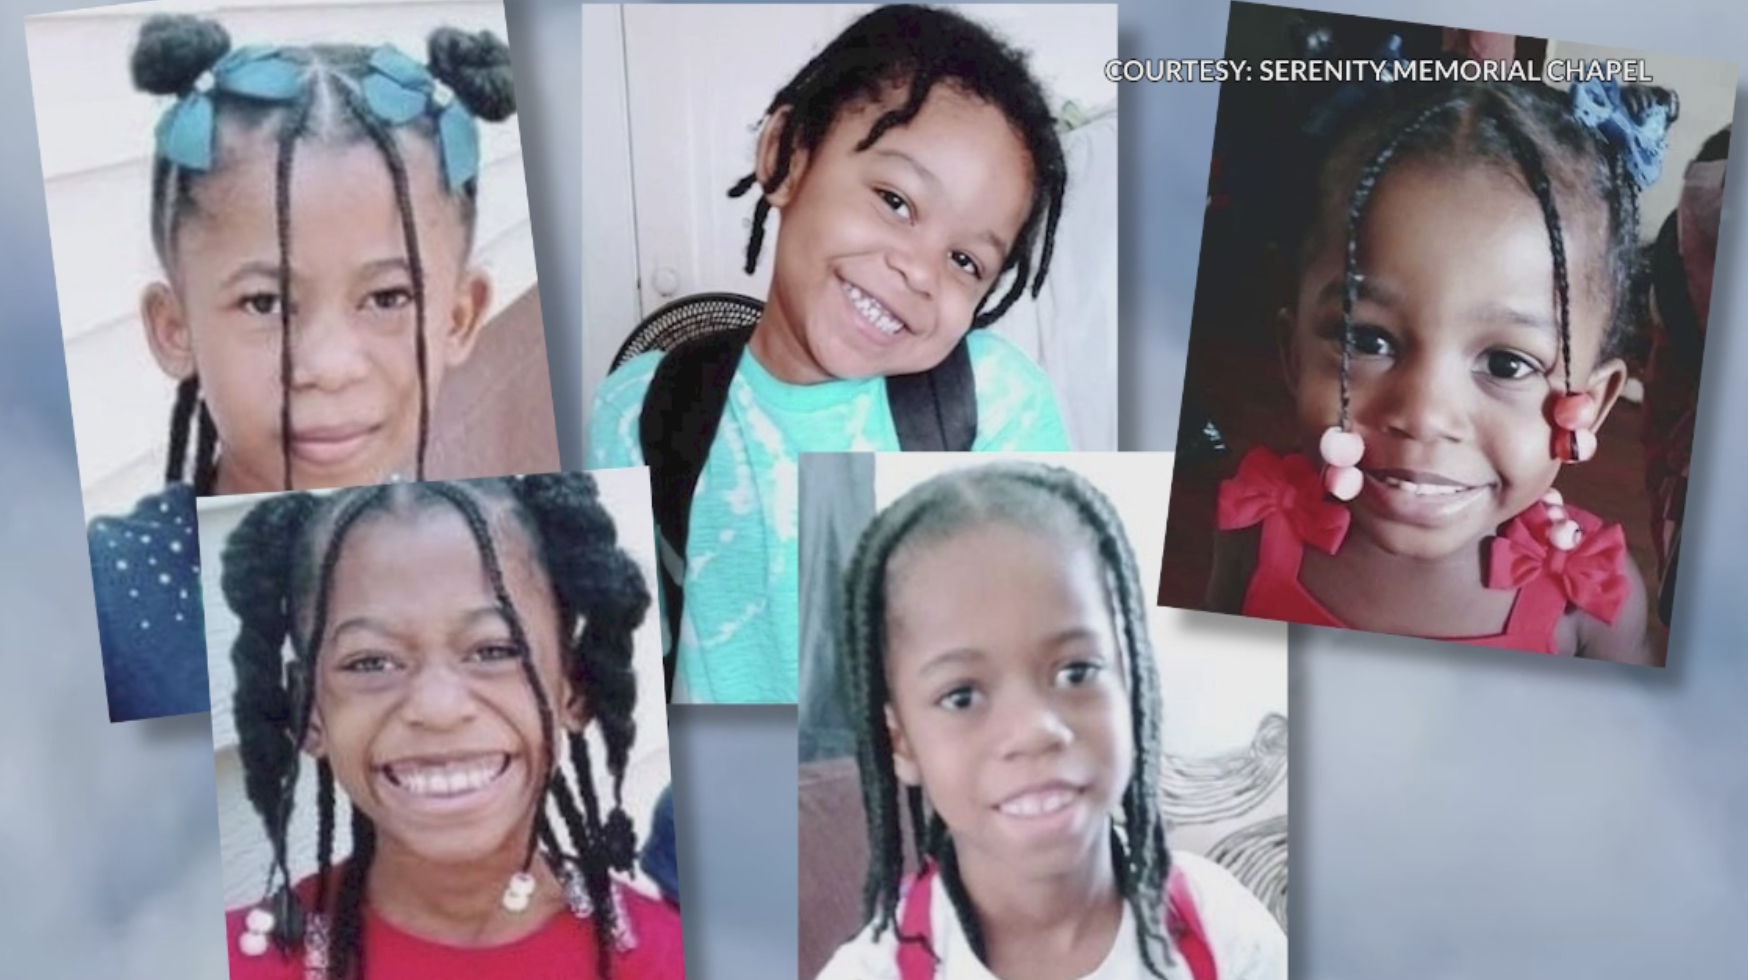 Mother Charged In Connection With Fire That Killed Her 5 Children